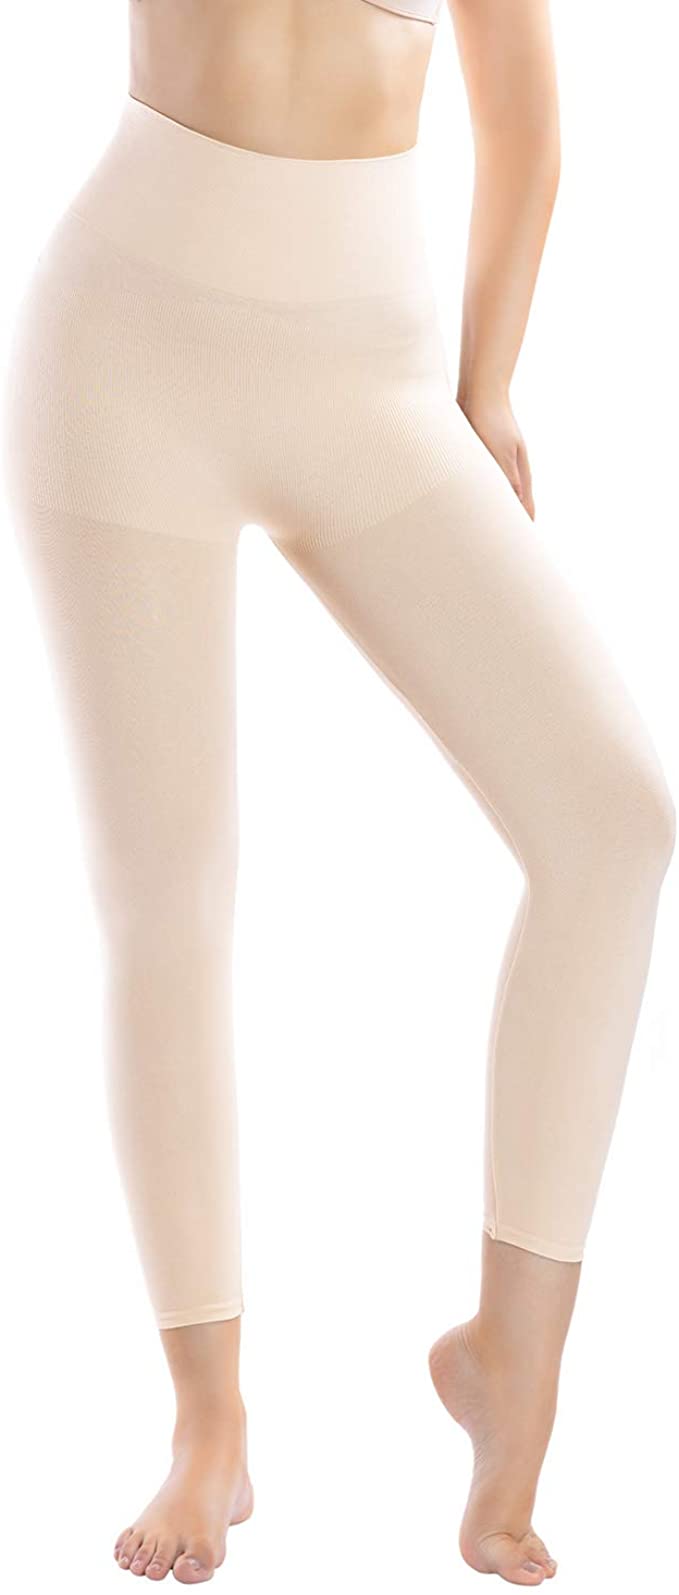 MD Women's High Waist Target Firm Control Shapewear Compression Slimming Leggings